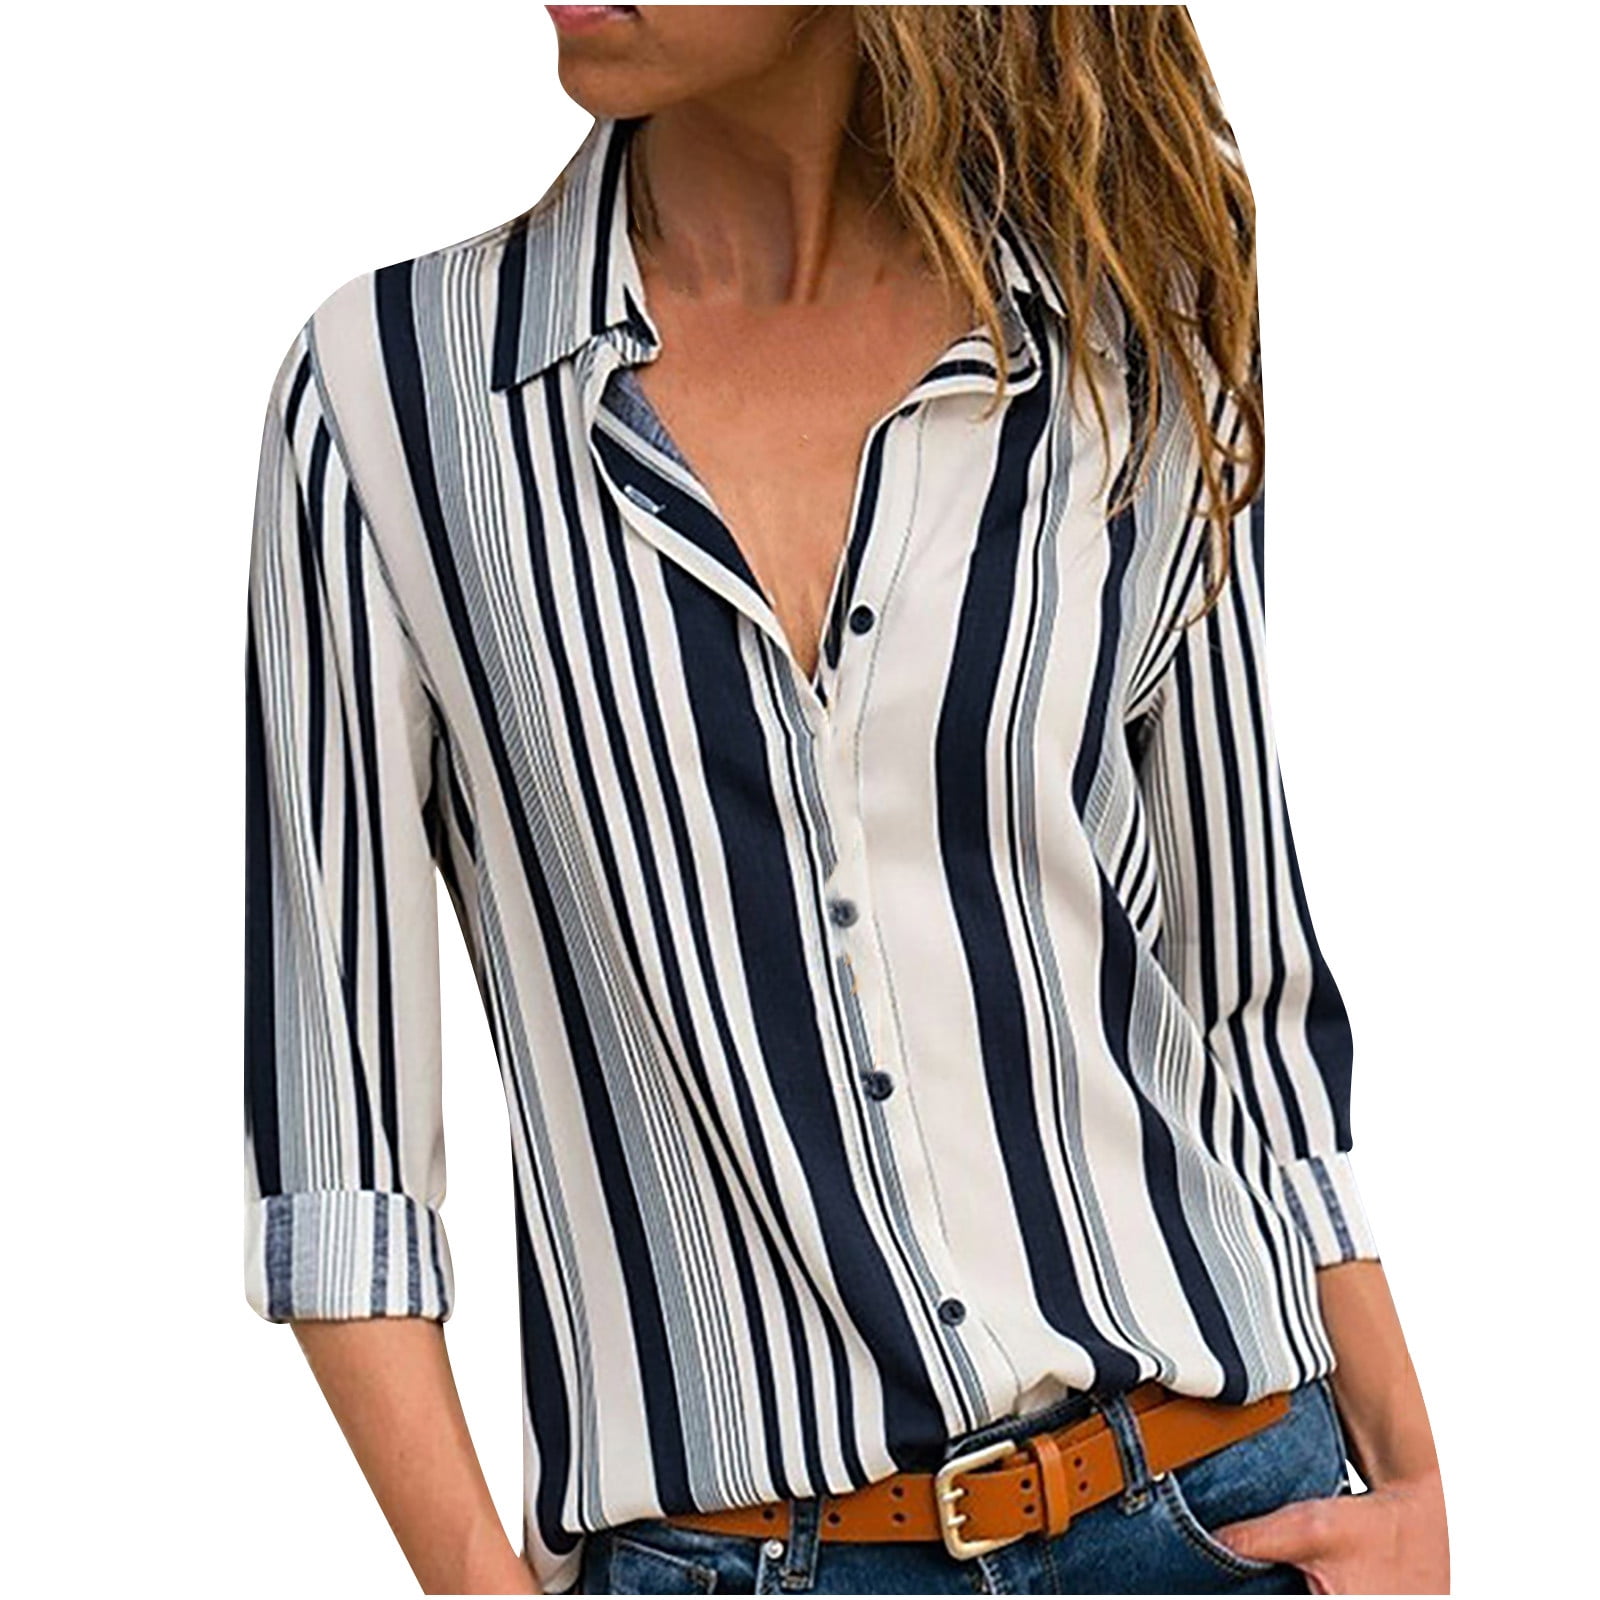 RQYYD Women's Casual Striped Button Down Shirts Long Sleeve V Neck ...